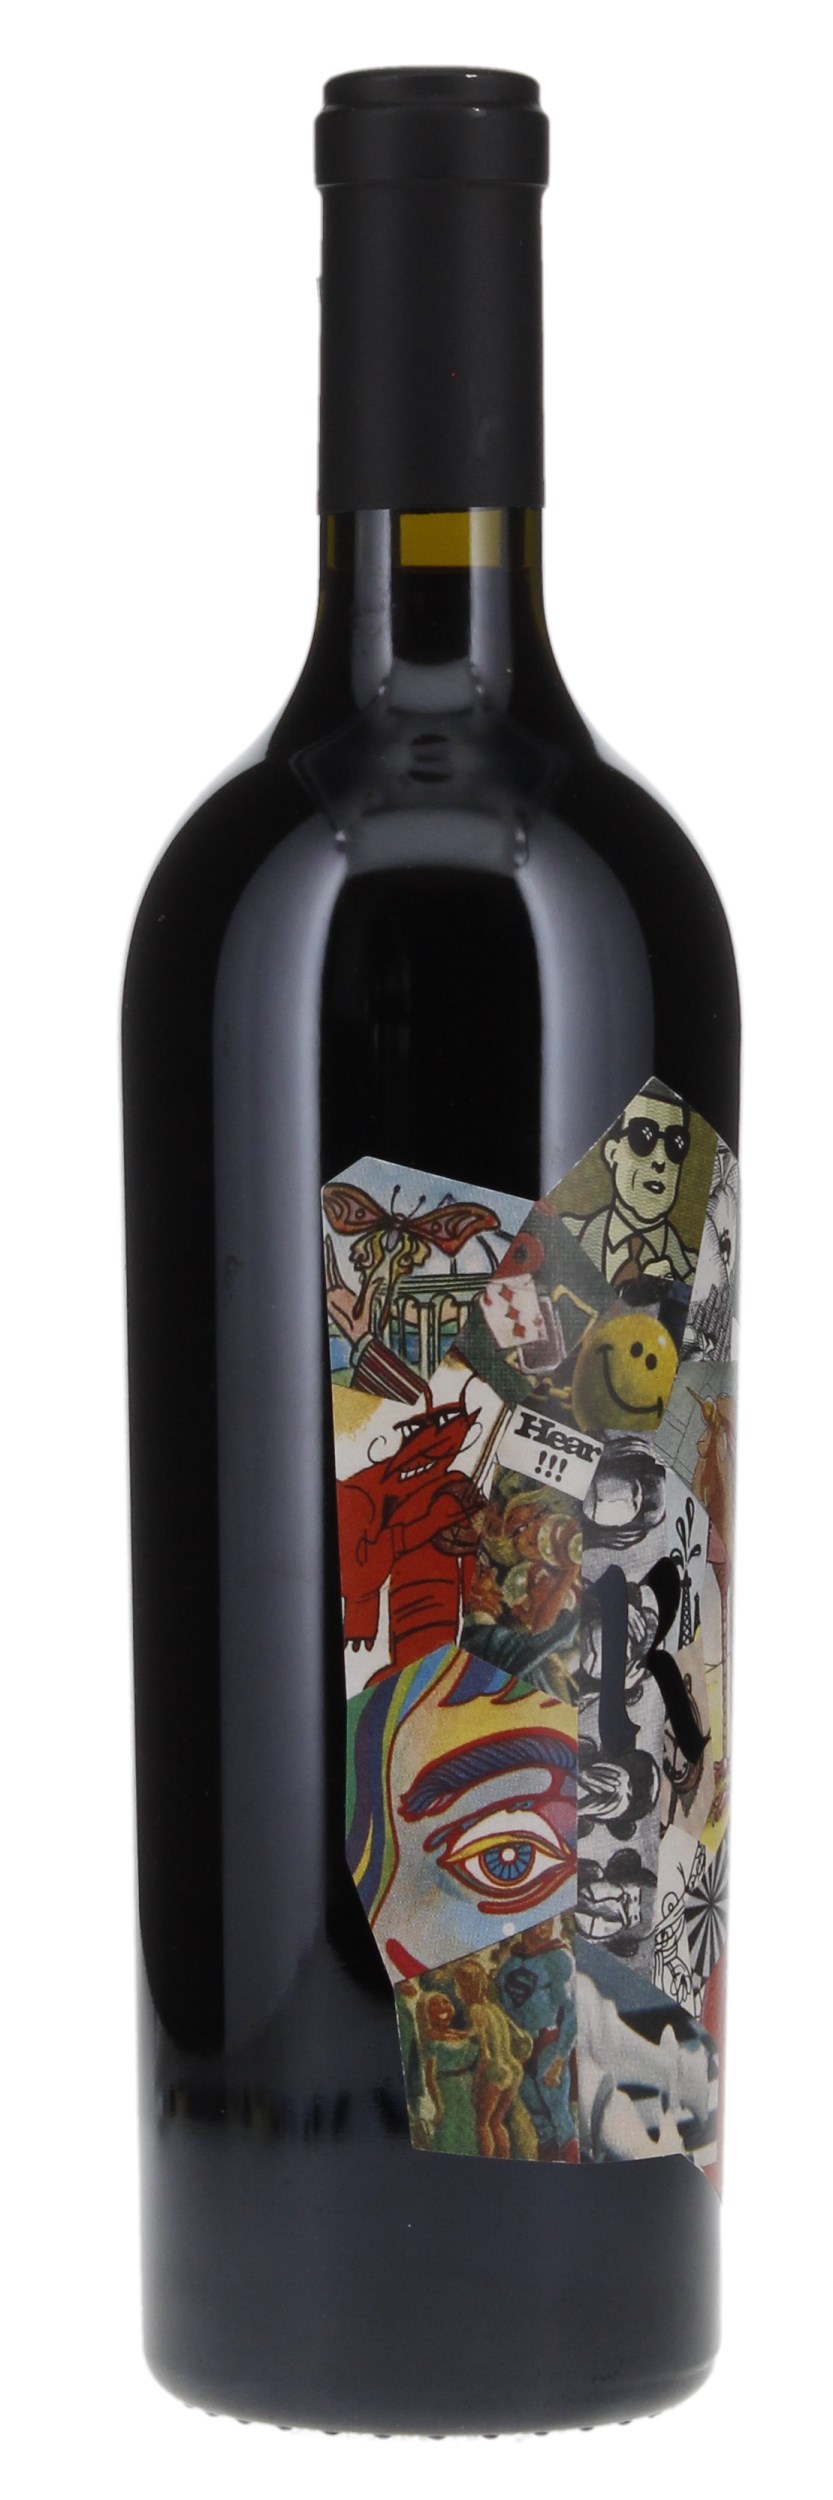 2018 Realm The Absurd, 750ml